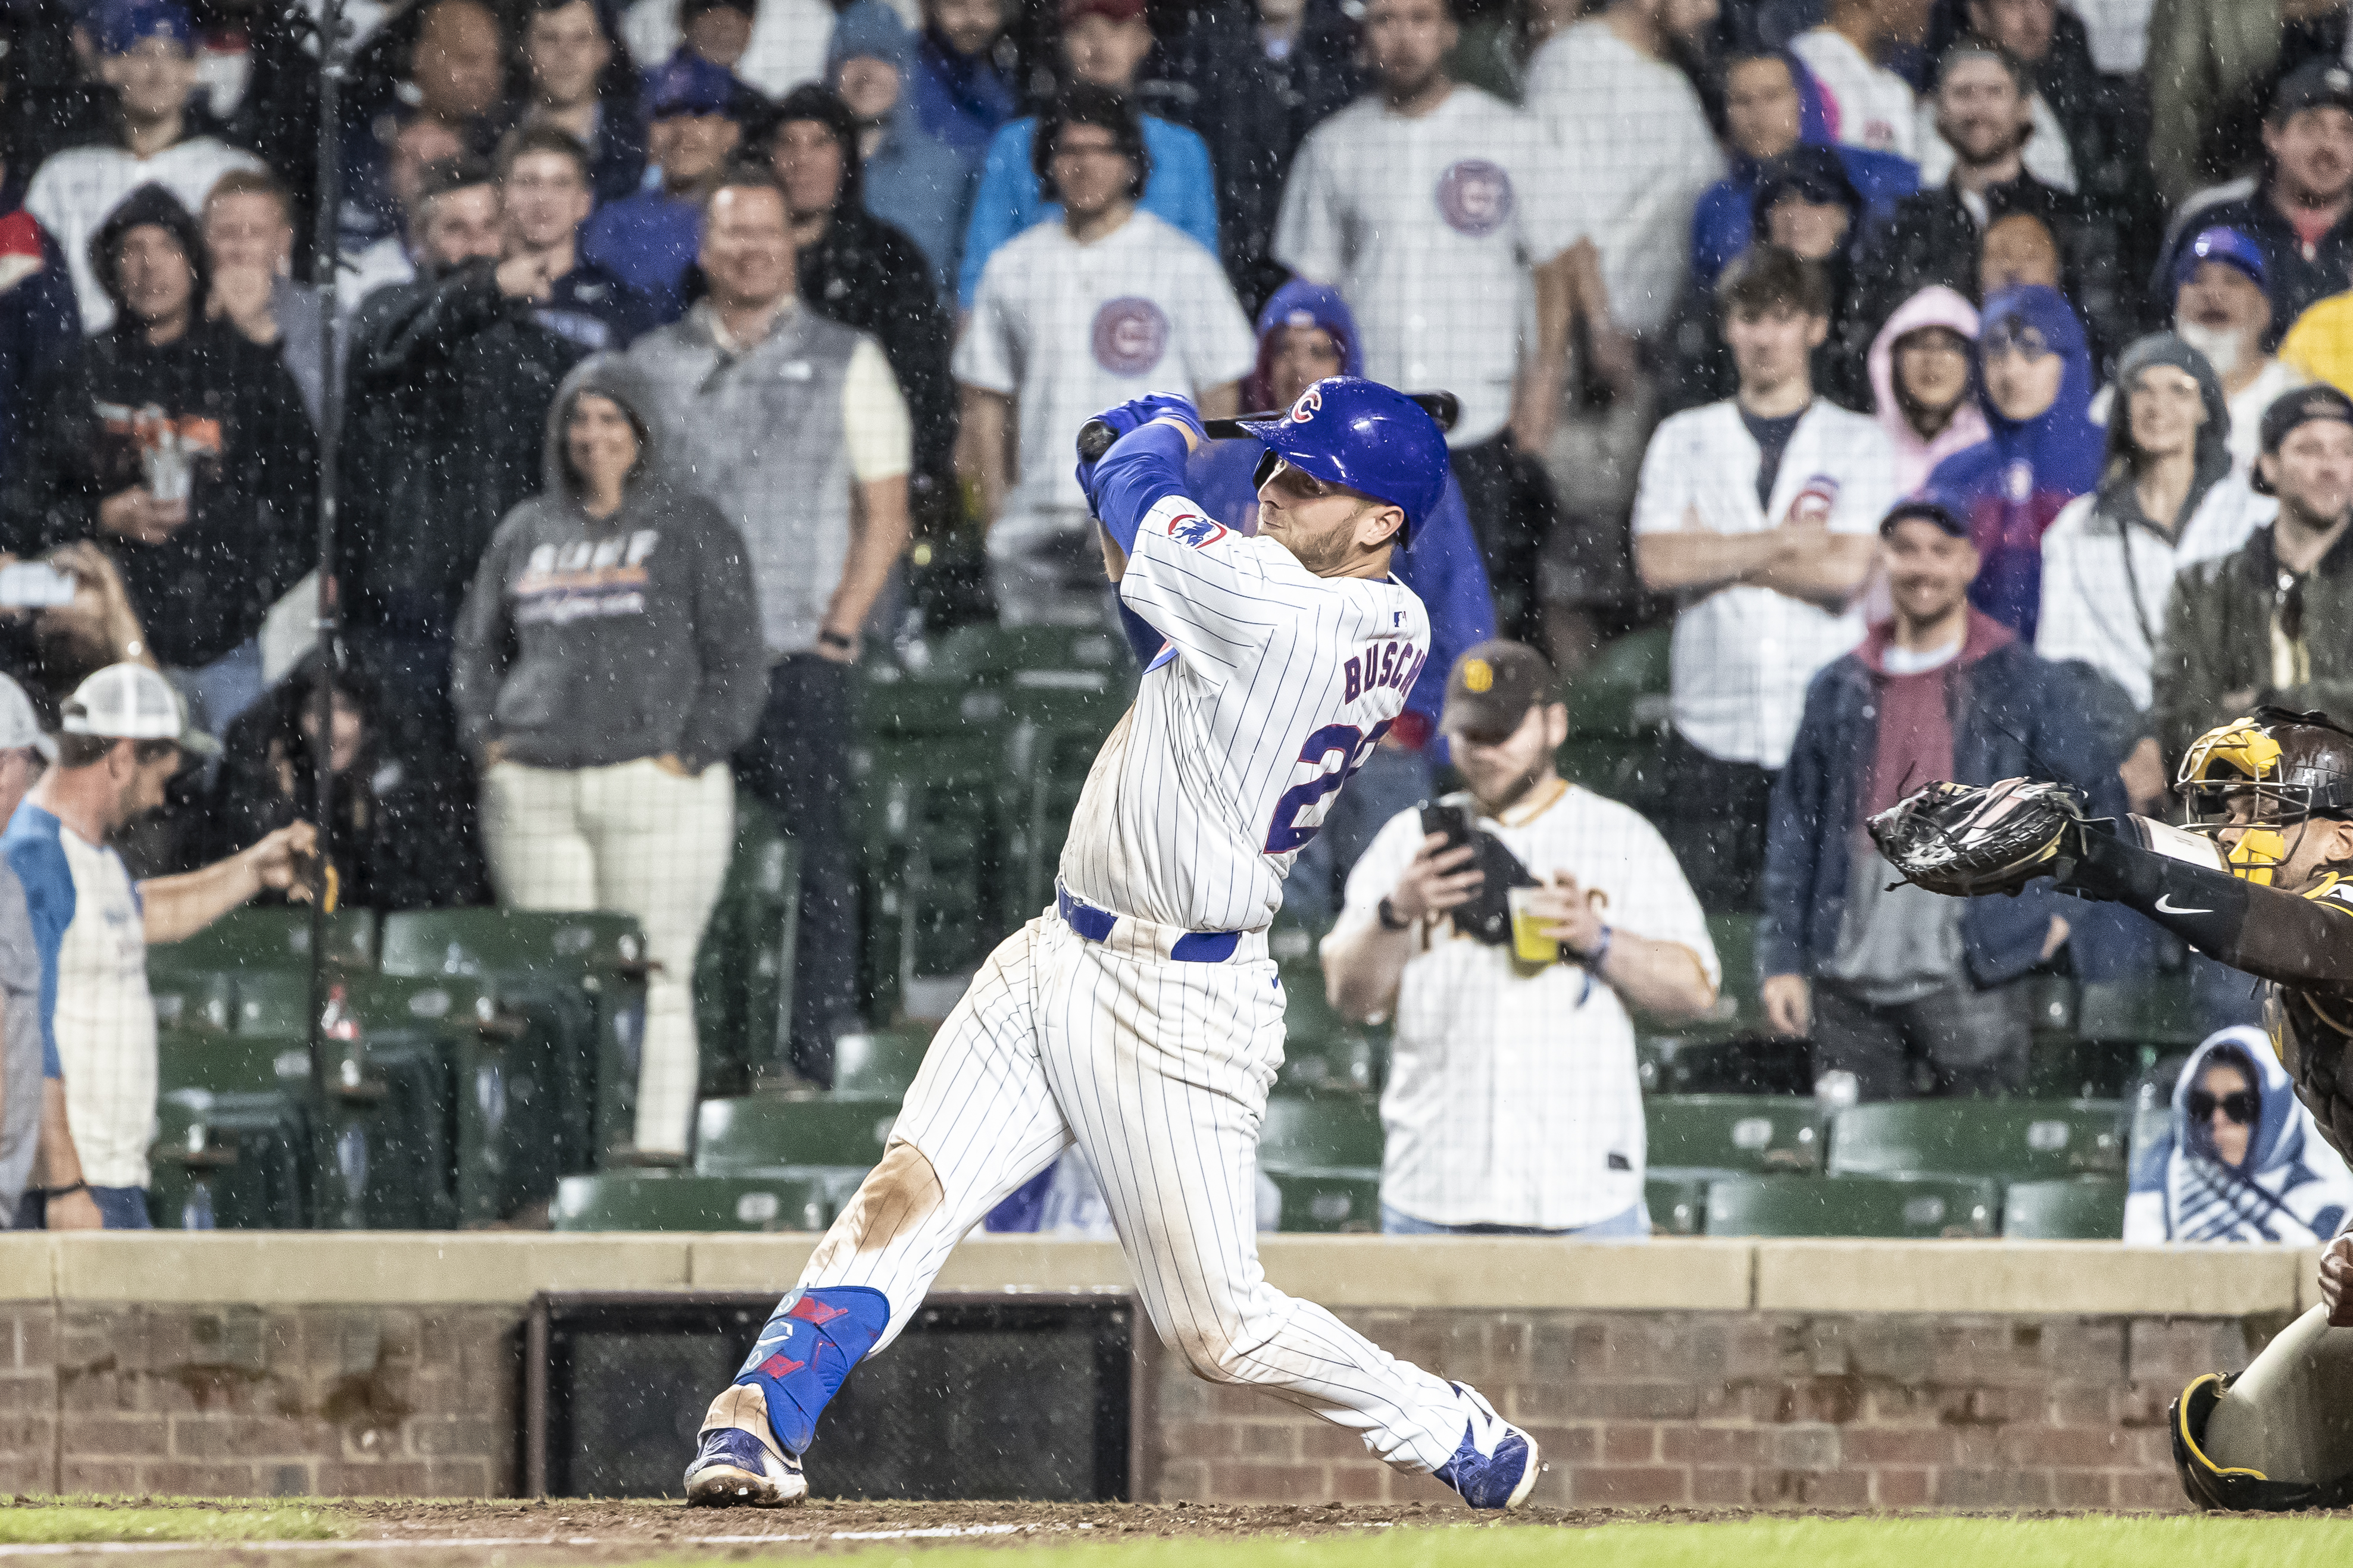 Wednesday Morning Sports 5/8: Cubs walk it off; Blackhawks awarded 2nd pick